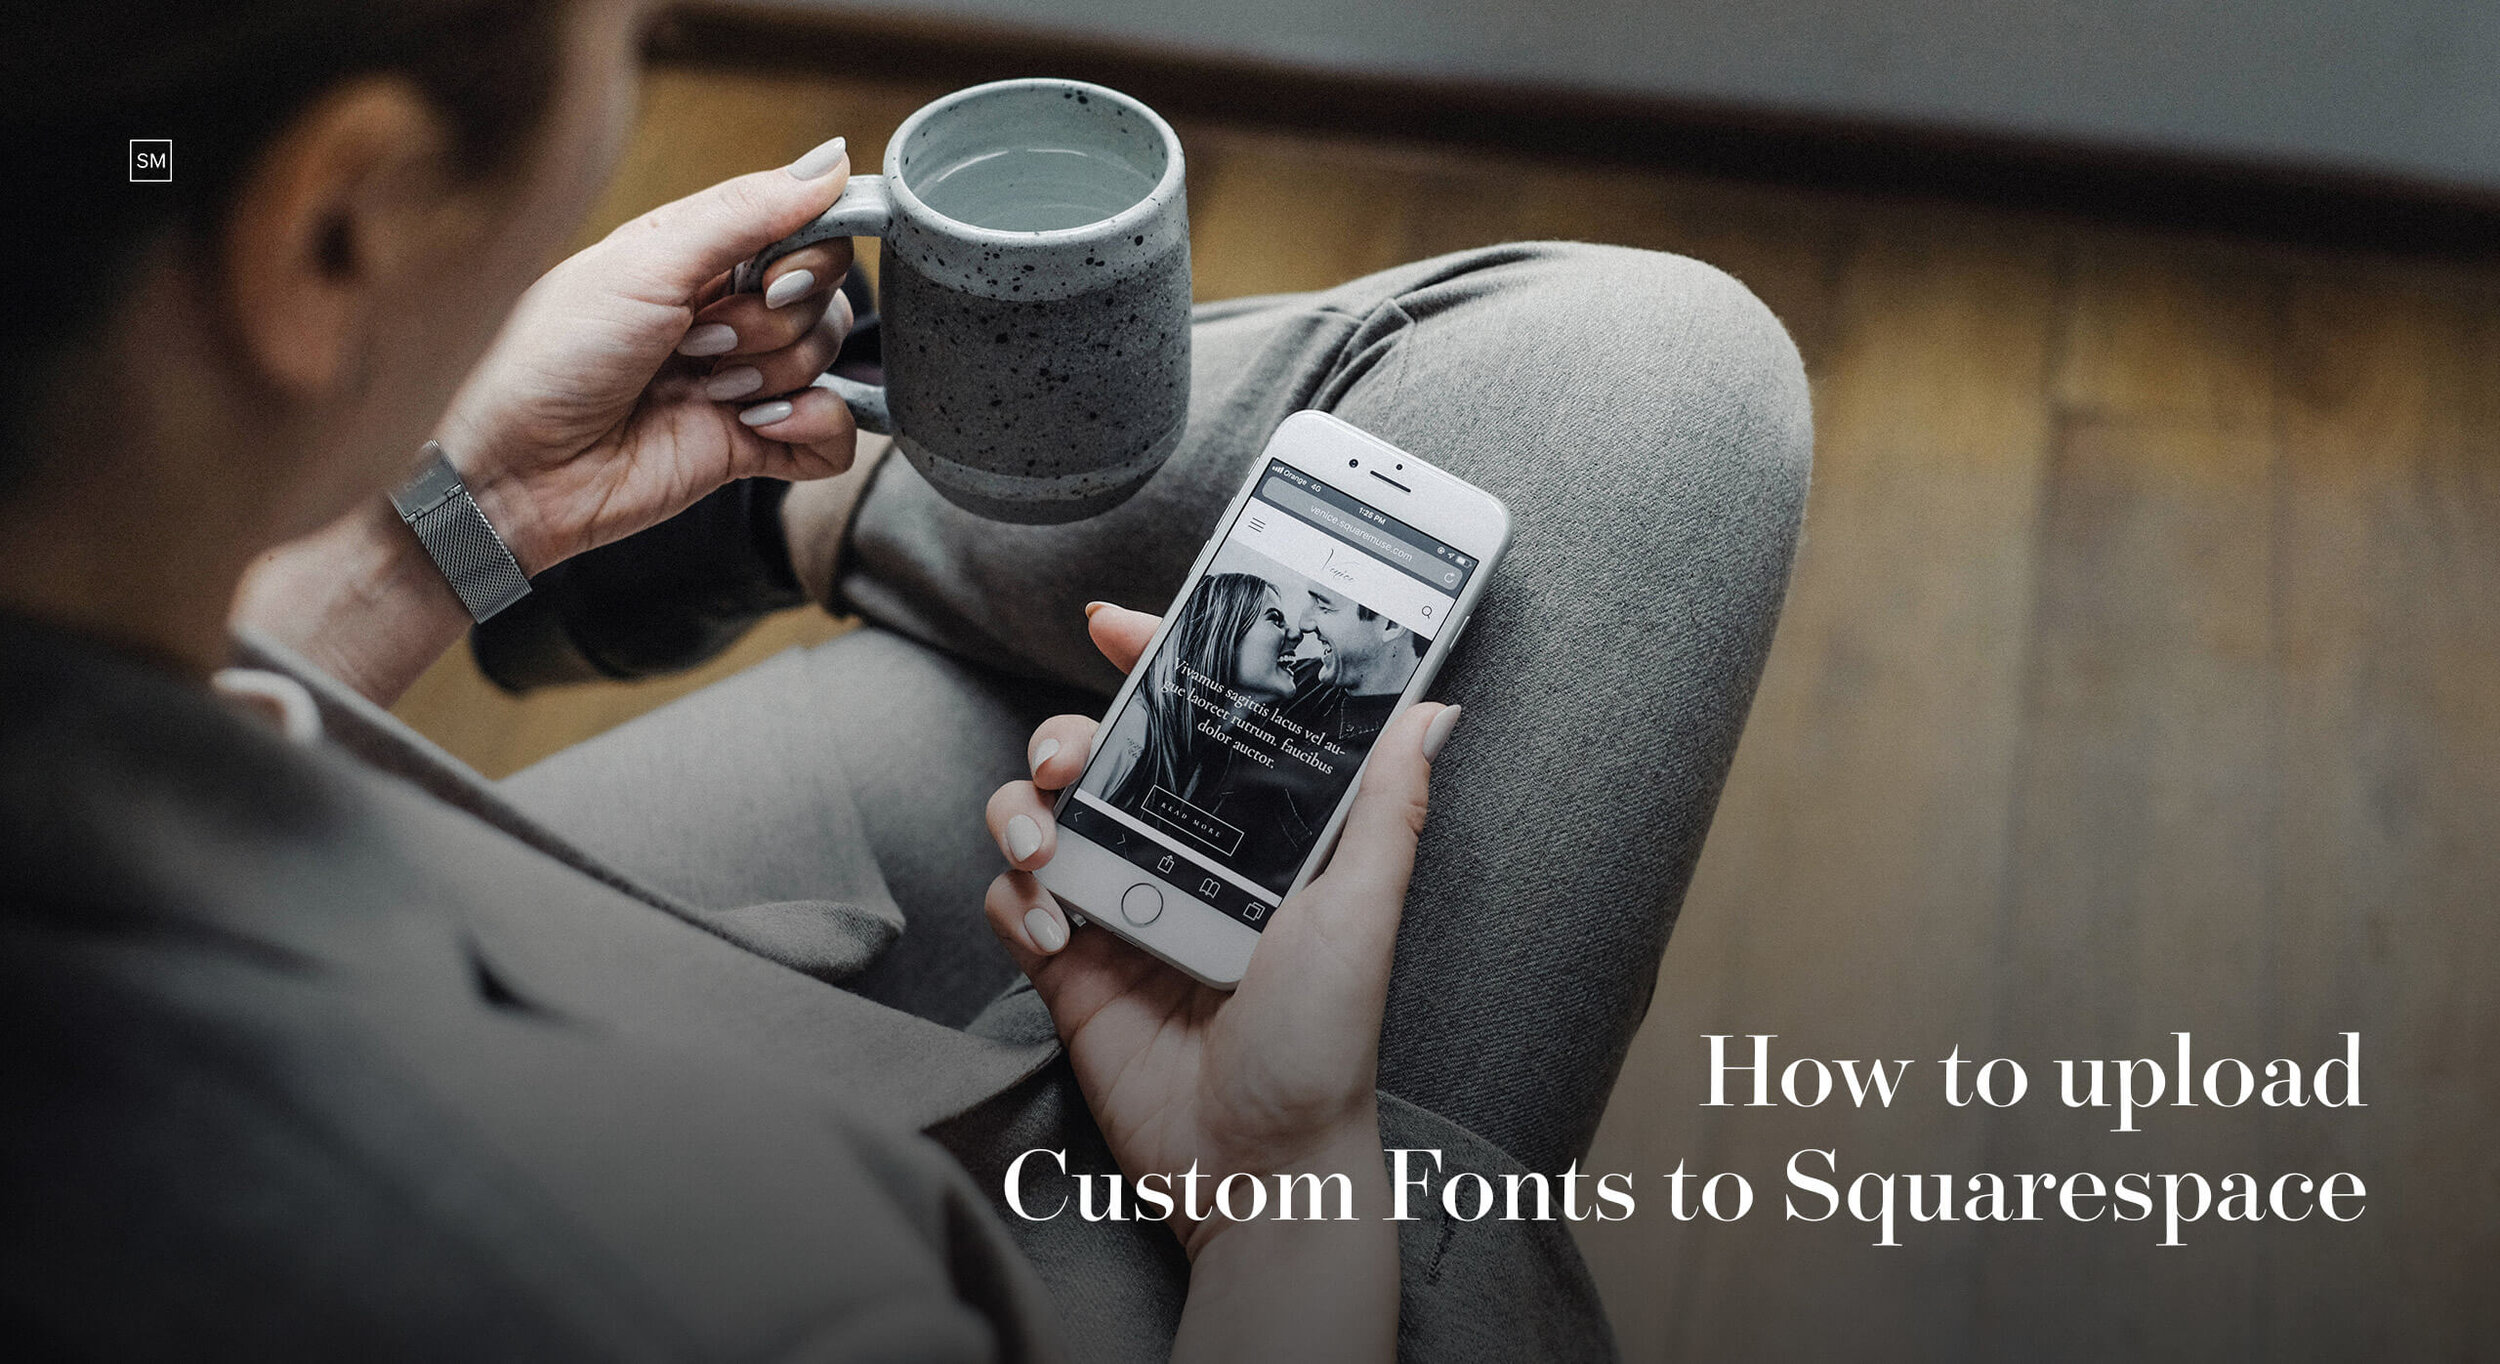 How to upload Custom Fonts to Squarespace